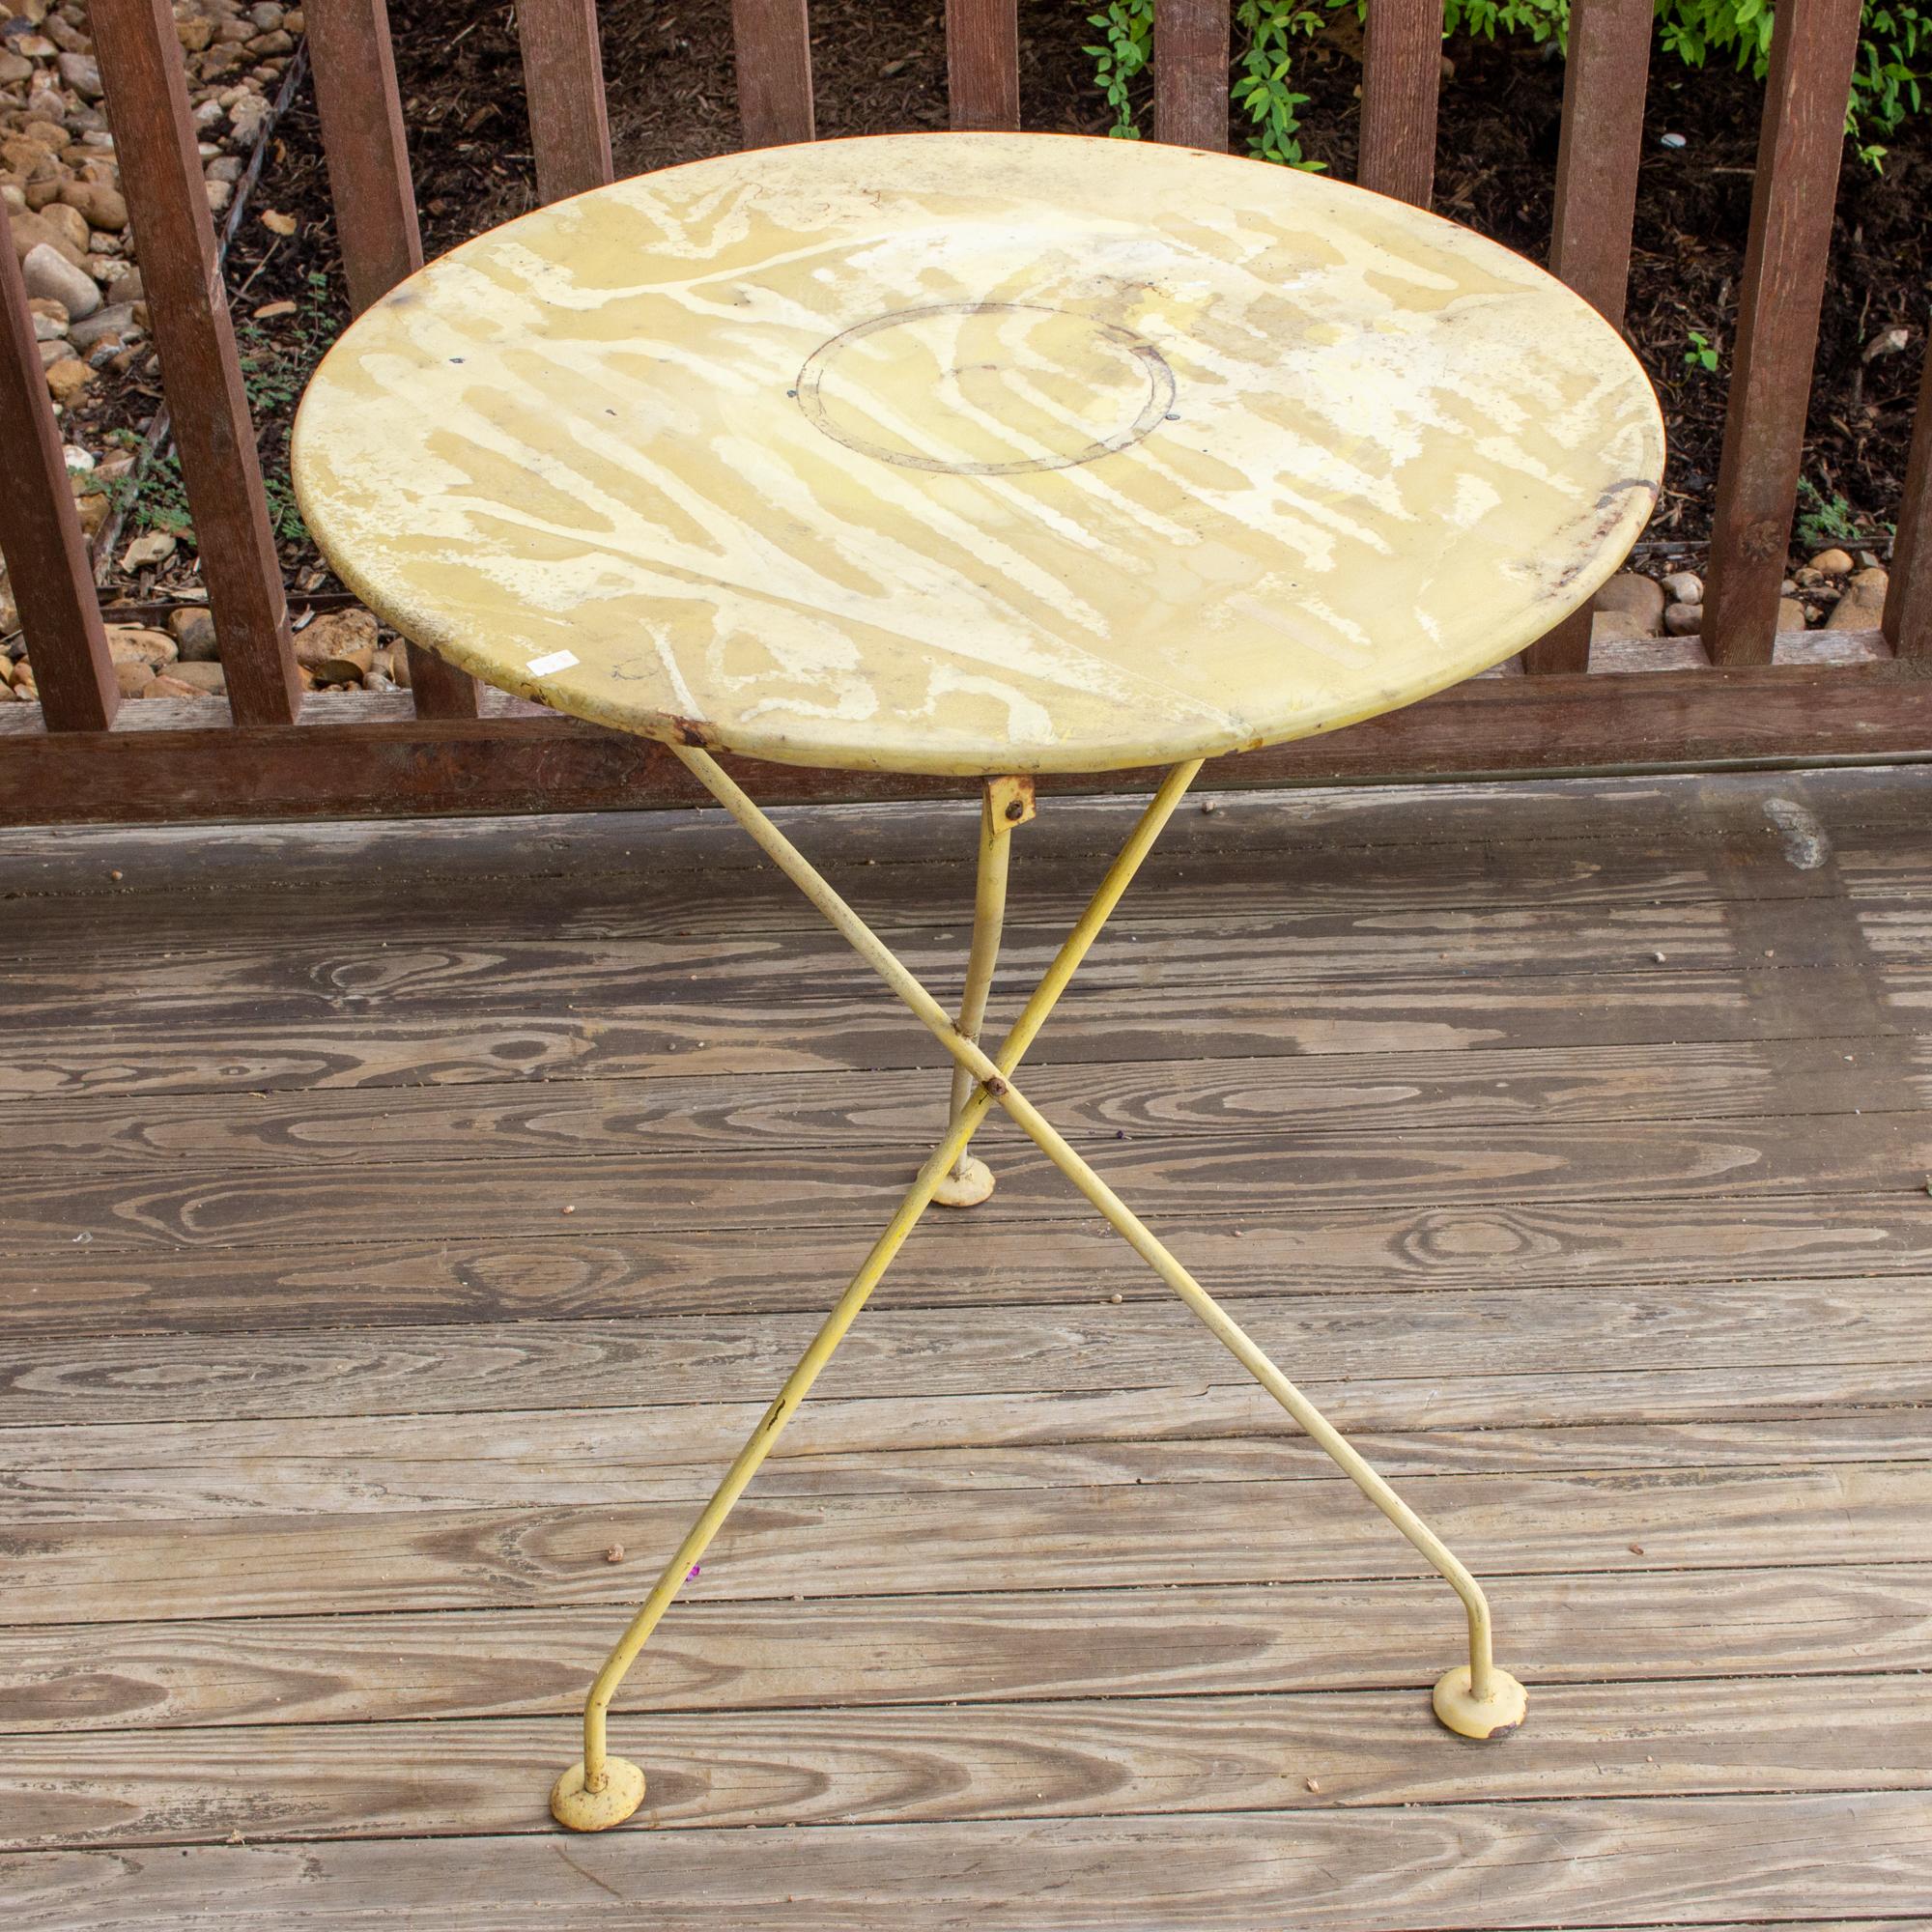 This 1920s French metal bistro table is painted pale yellow and has a tripod-style base. The top is weathered and patinated with time and age and was likely used outdoors. This lightweight table is easily moved around wherever needed, and could make